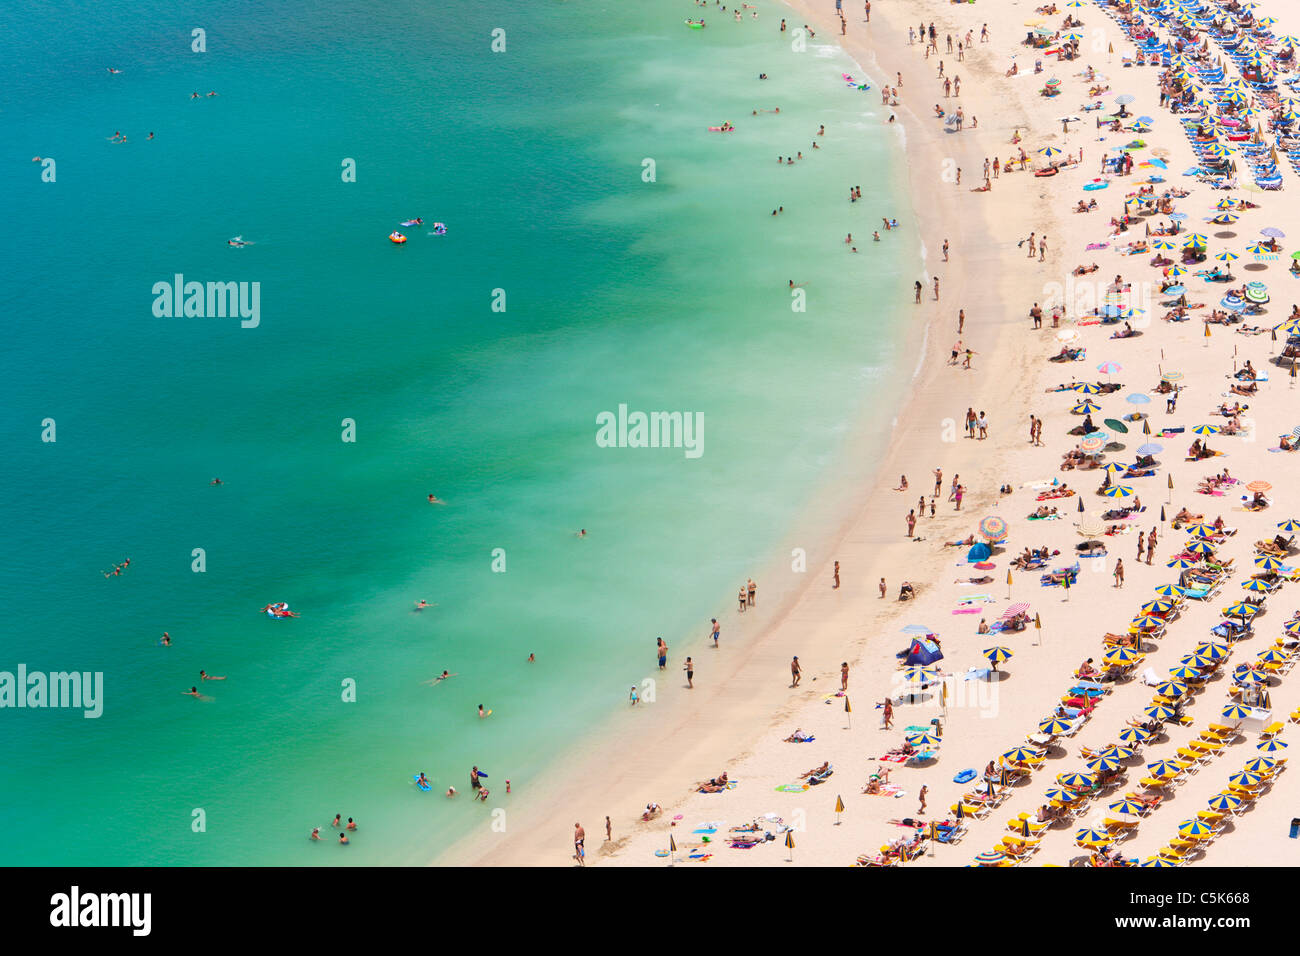 People sunbathing, swimming and relaxing at Playa Amadores beach, Gran Canaria, aerial view Stock Photo